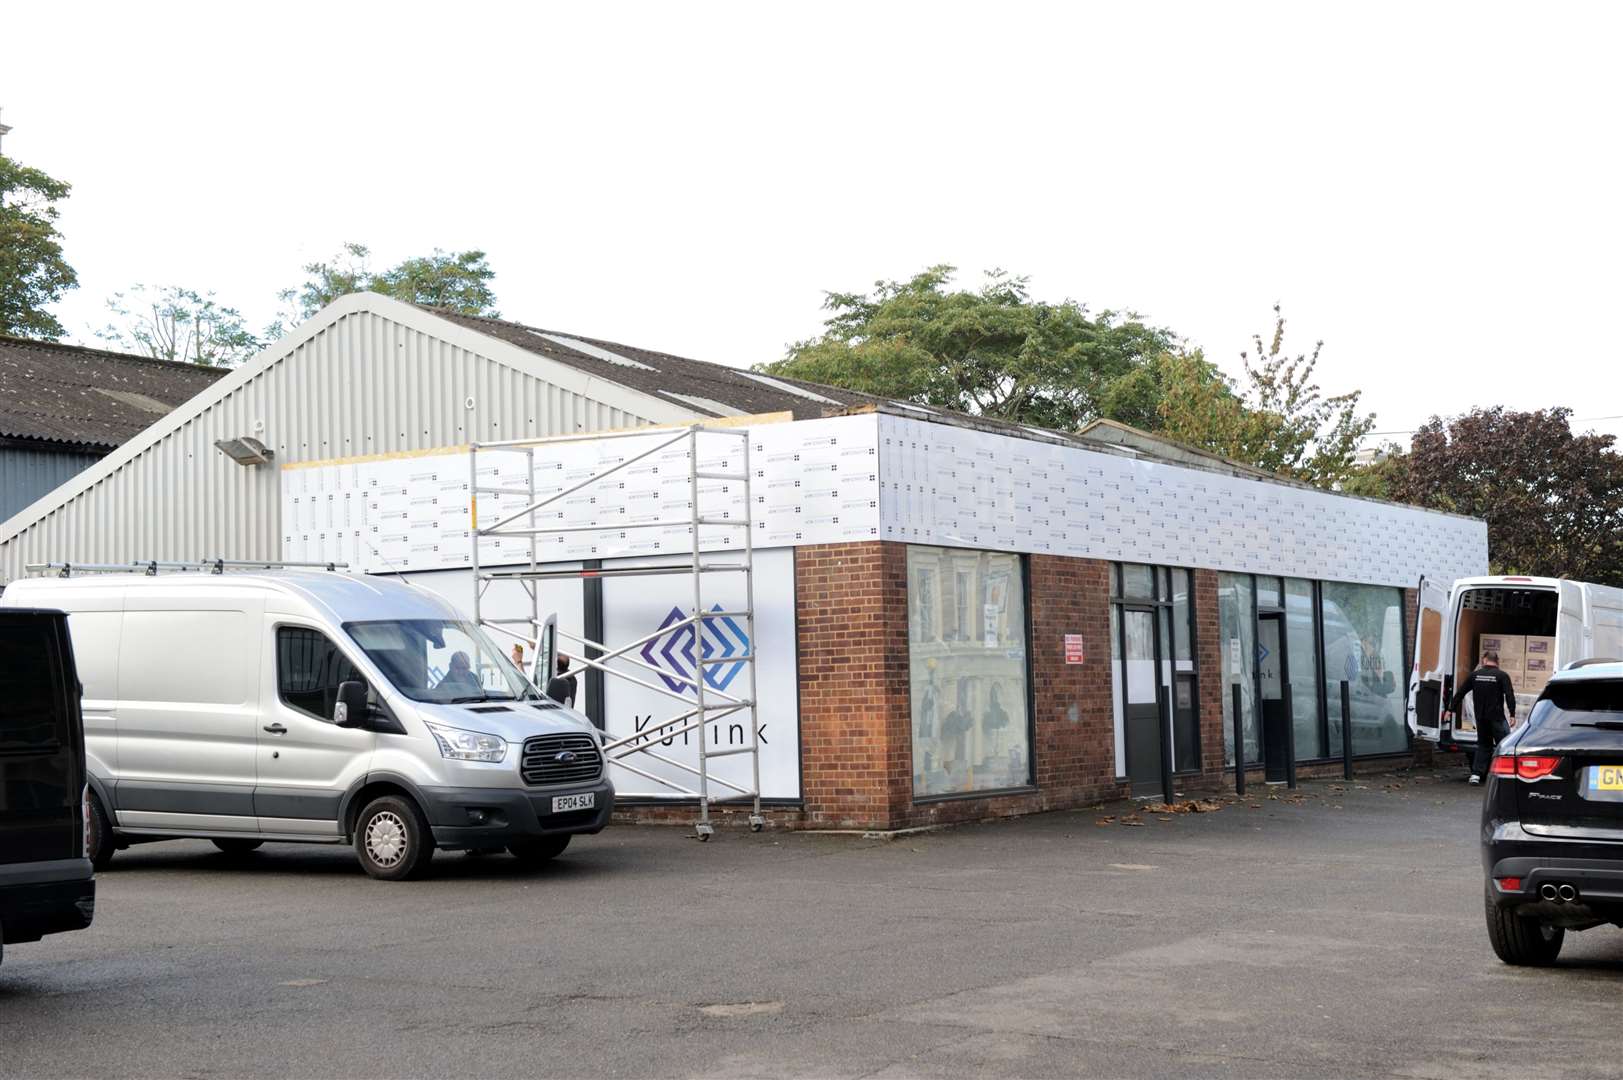 The site in West Street, Gravesend, is now home to local firm Kuflink